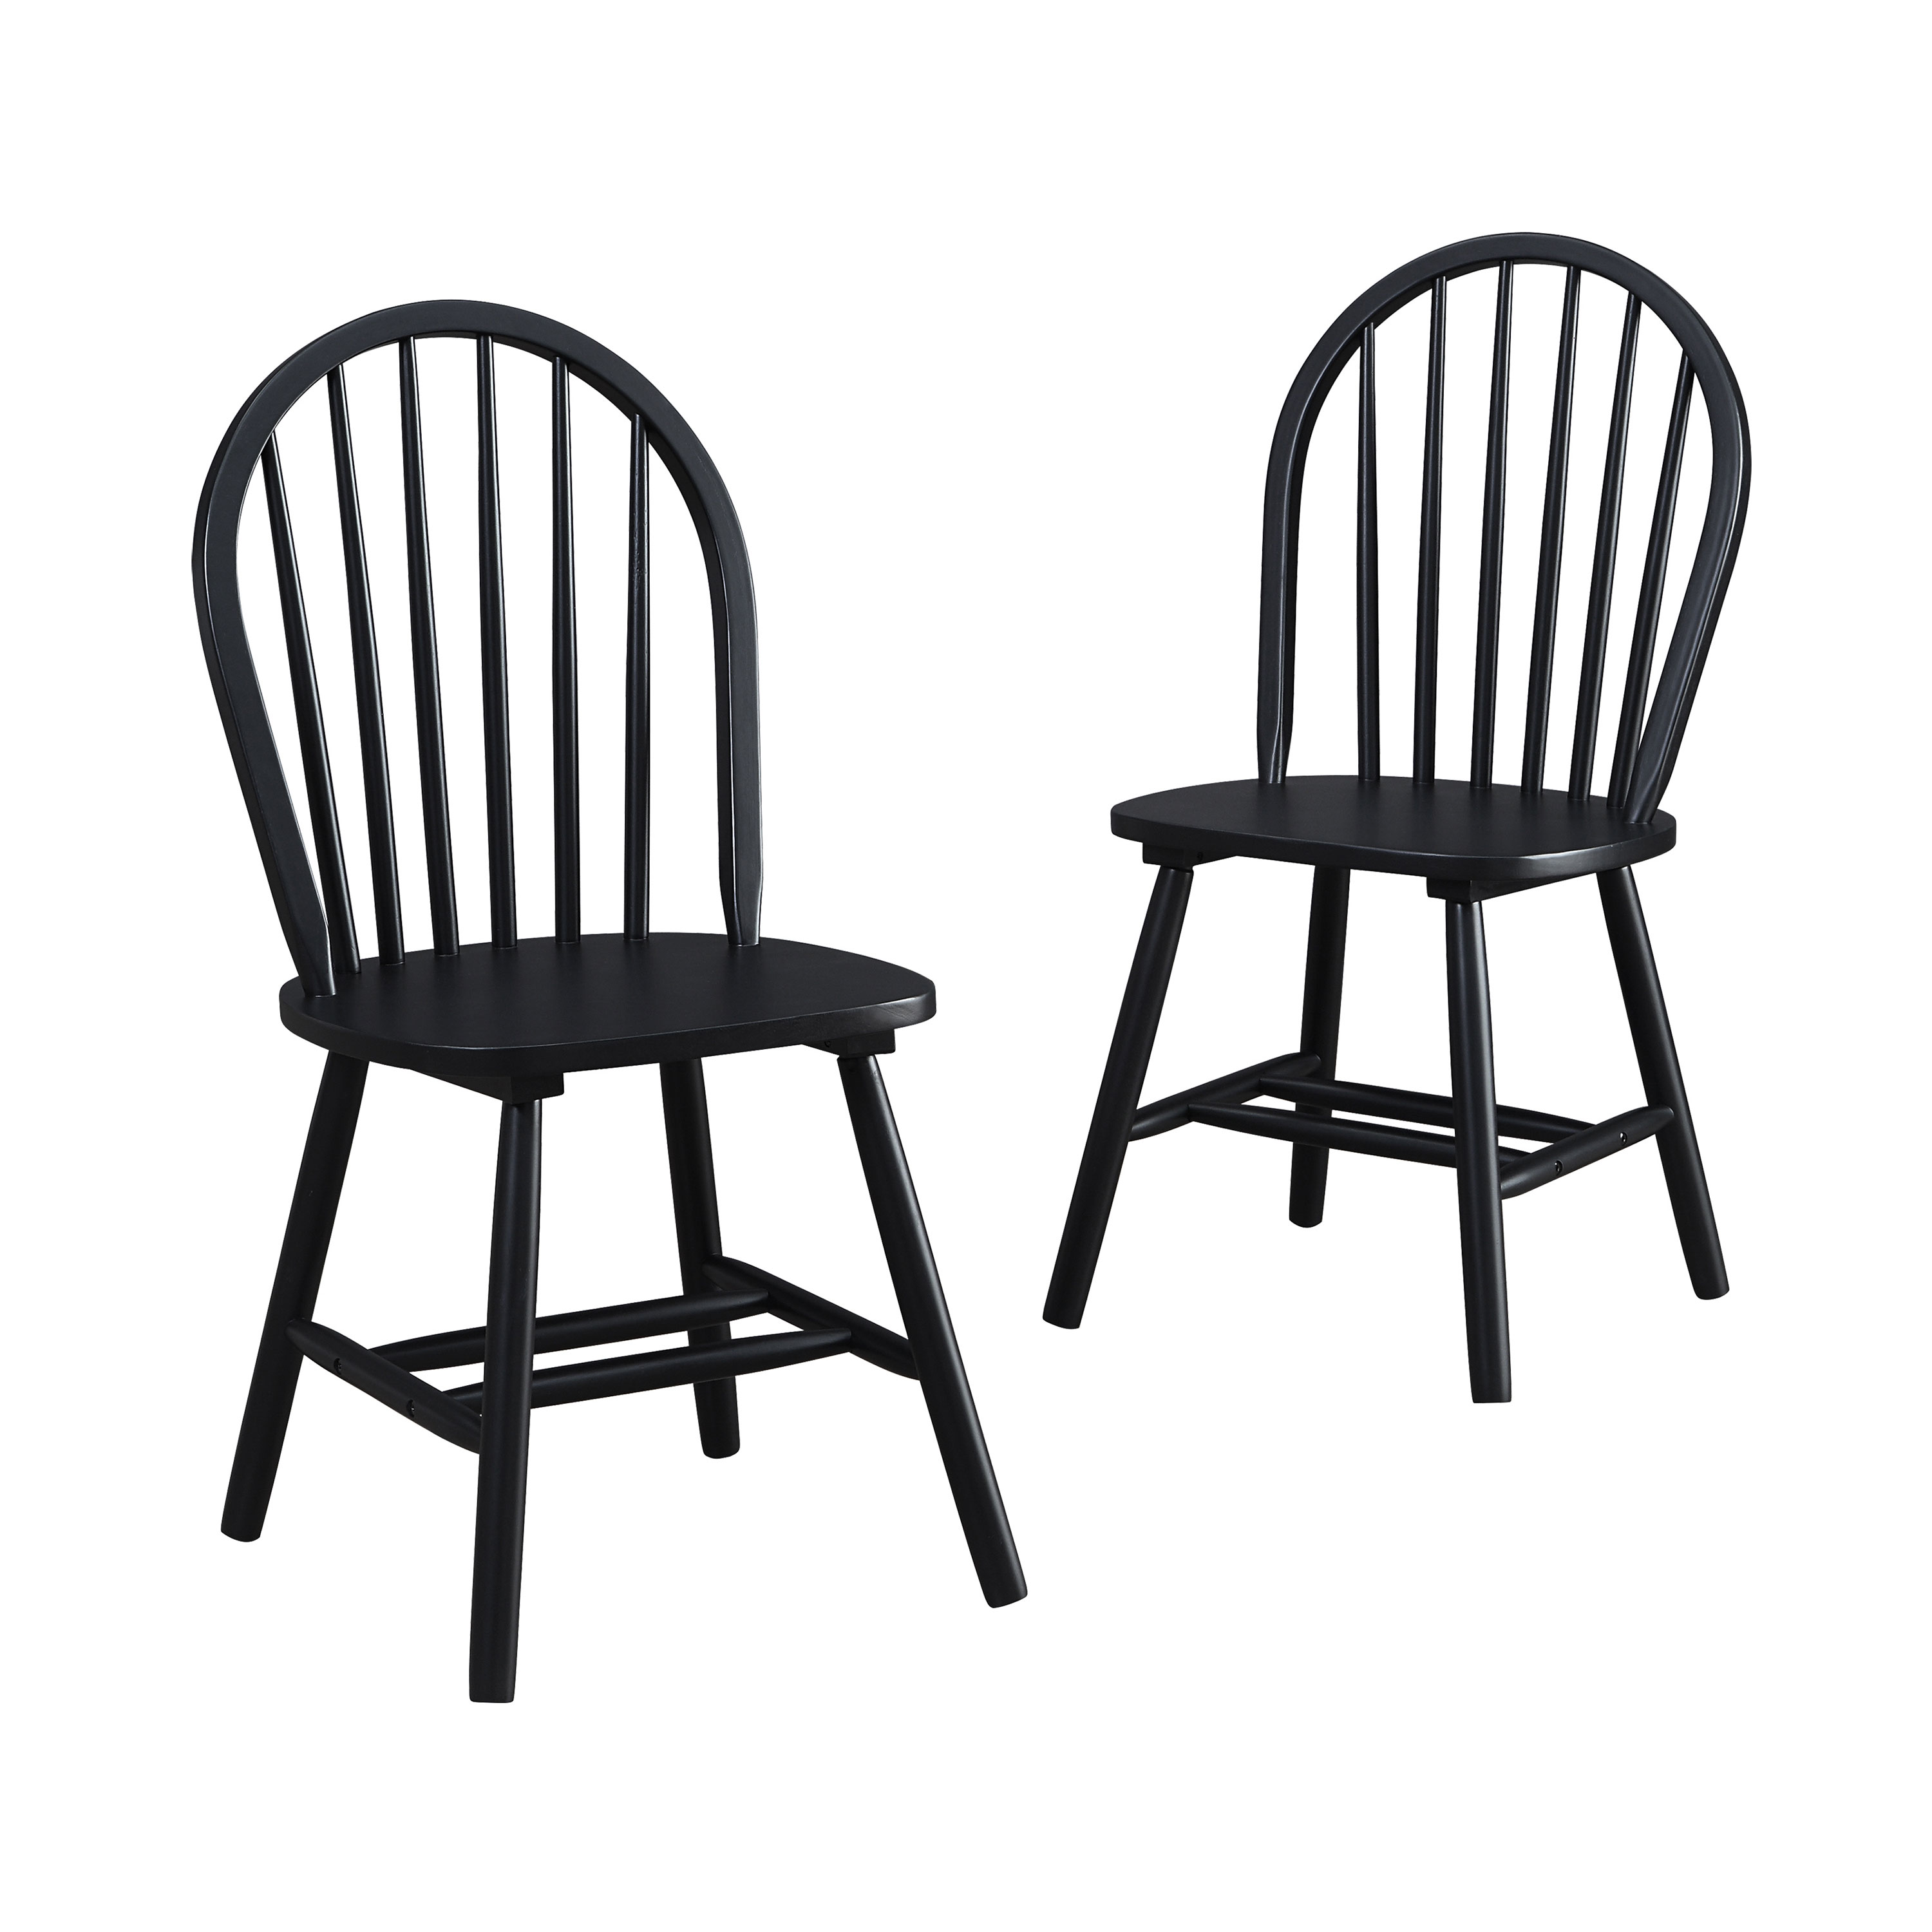 Better Homes and Gardens Autumn Lane Windsor Solid Wood Dining Chairs, Set of 2, Black Finish - image 1 of 10